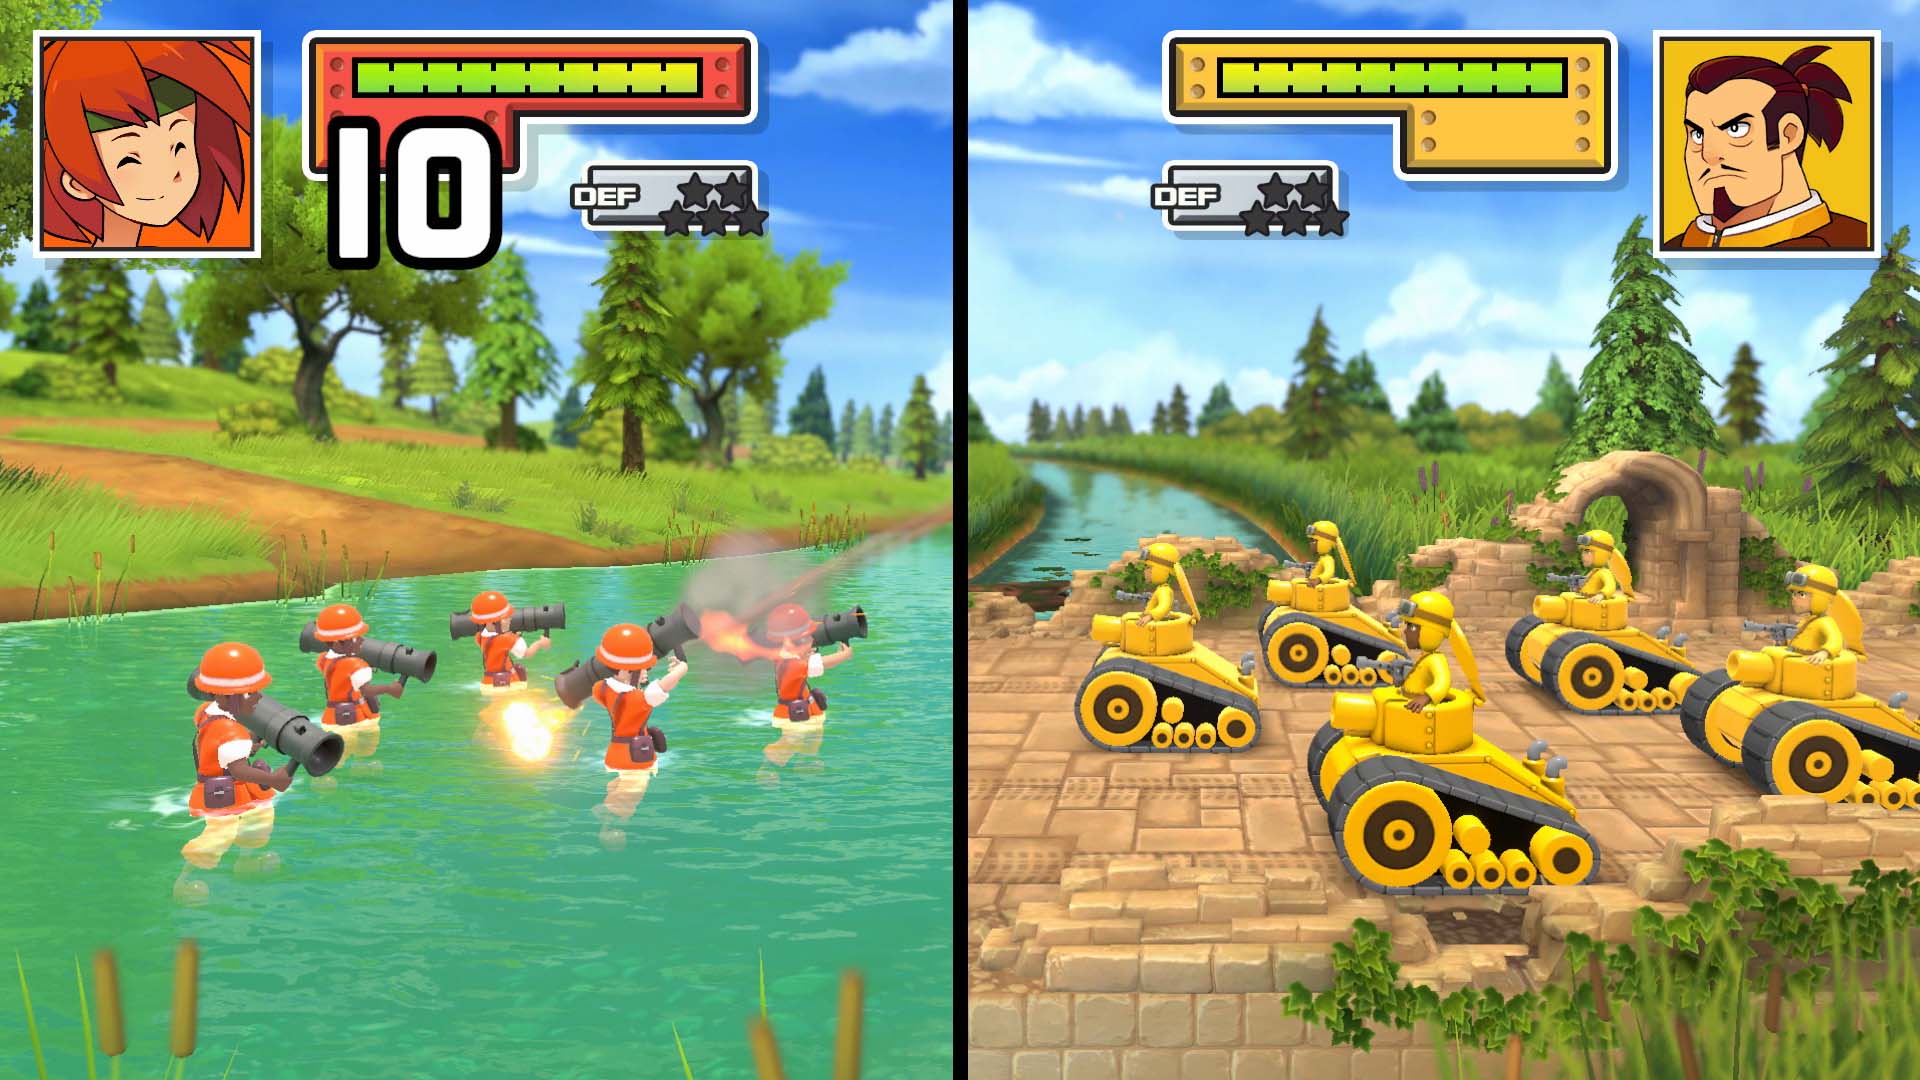 Advance Wars 1+2: Re-Boot Camp accessibility review - Can I Play That?